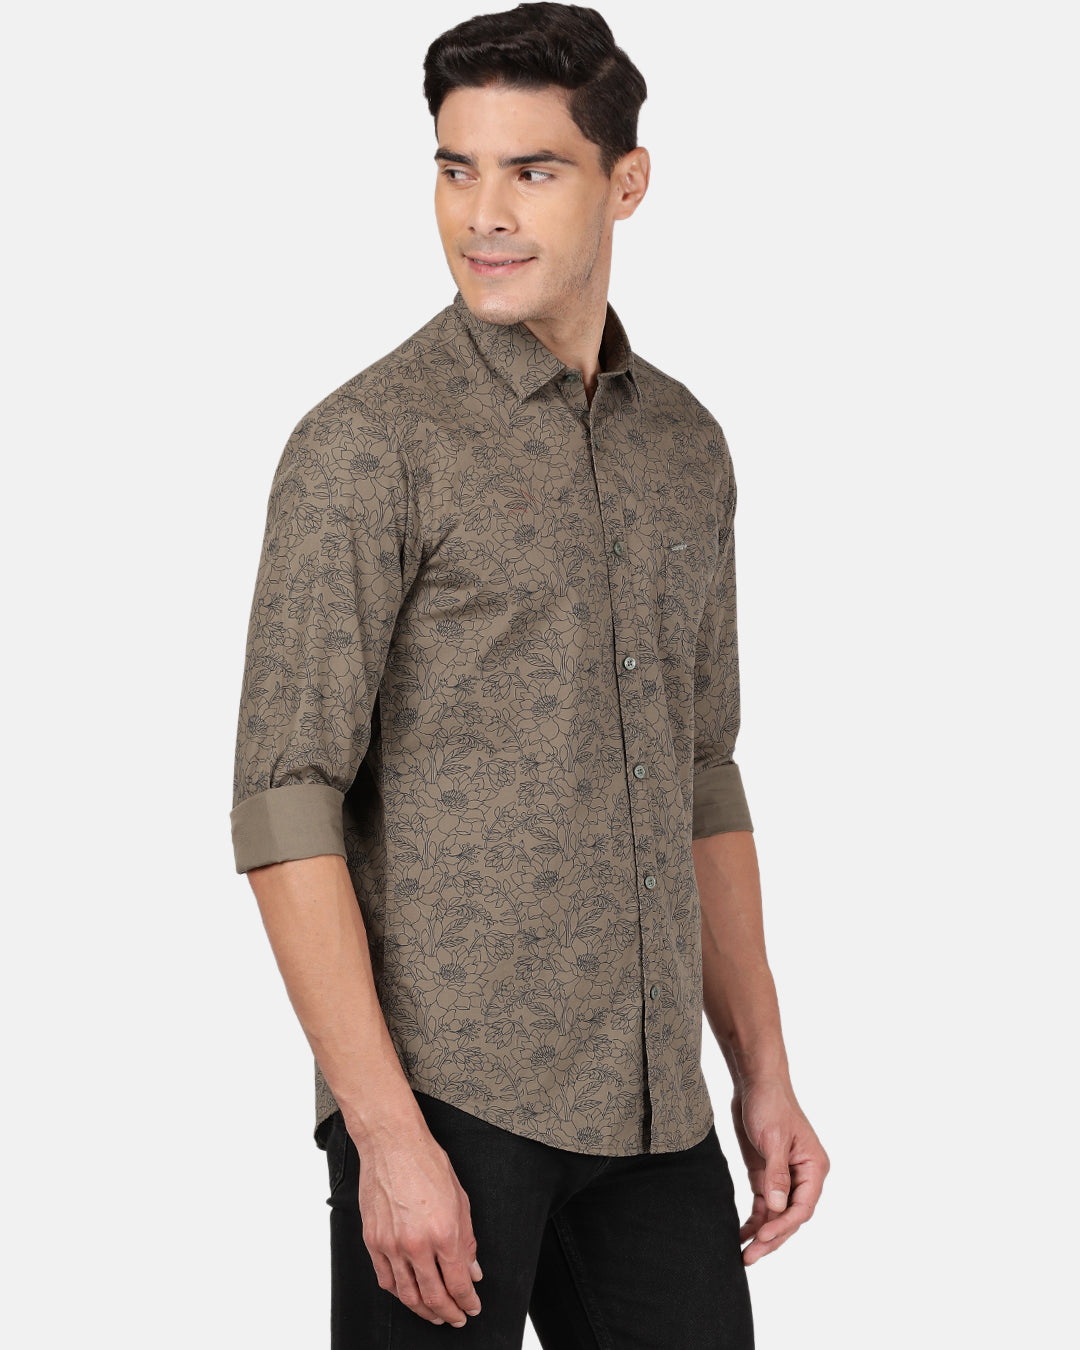 Crocodile Casual Full Sleeve Slim Fit Printed Olive with Collar Shirt for Men